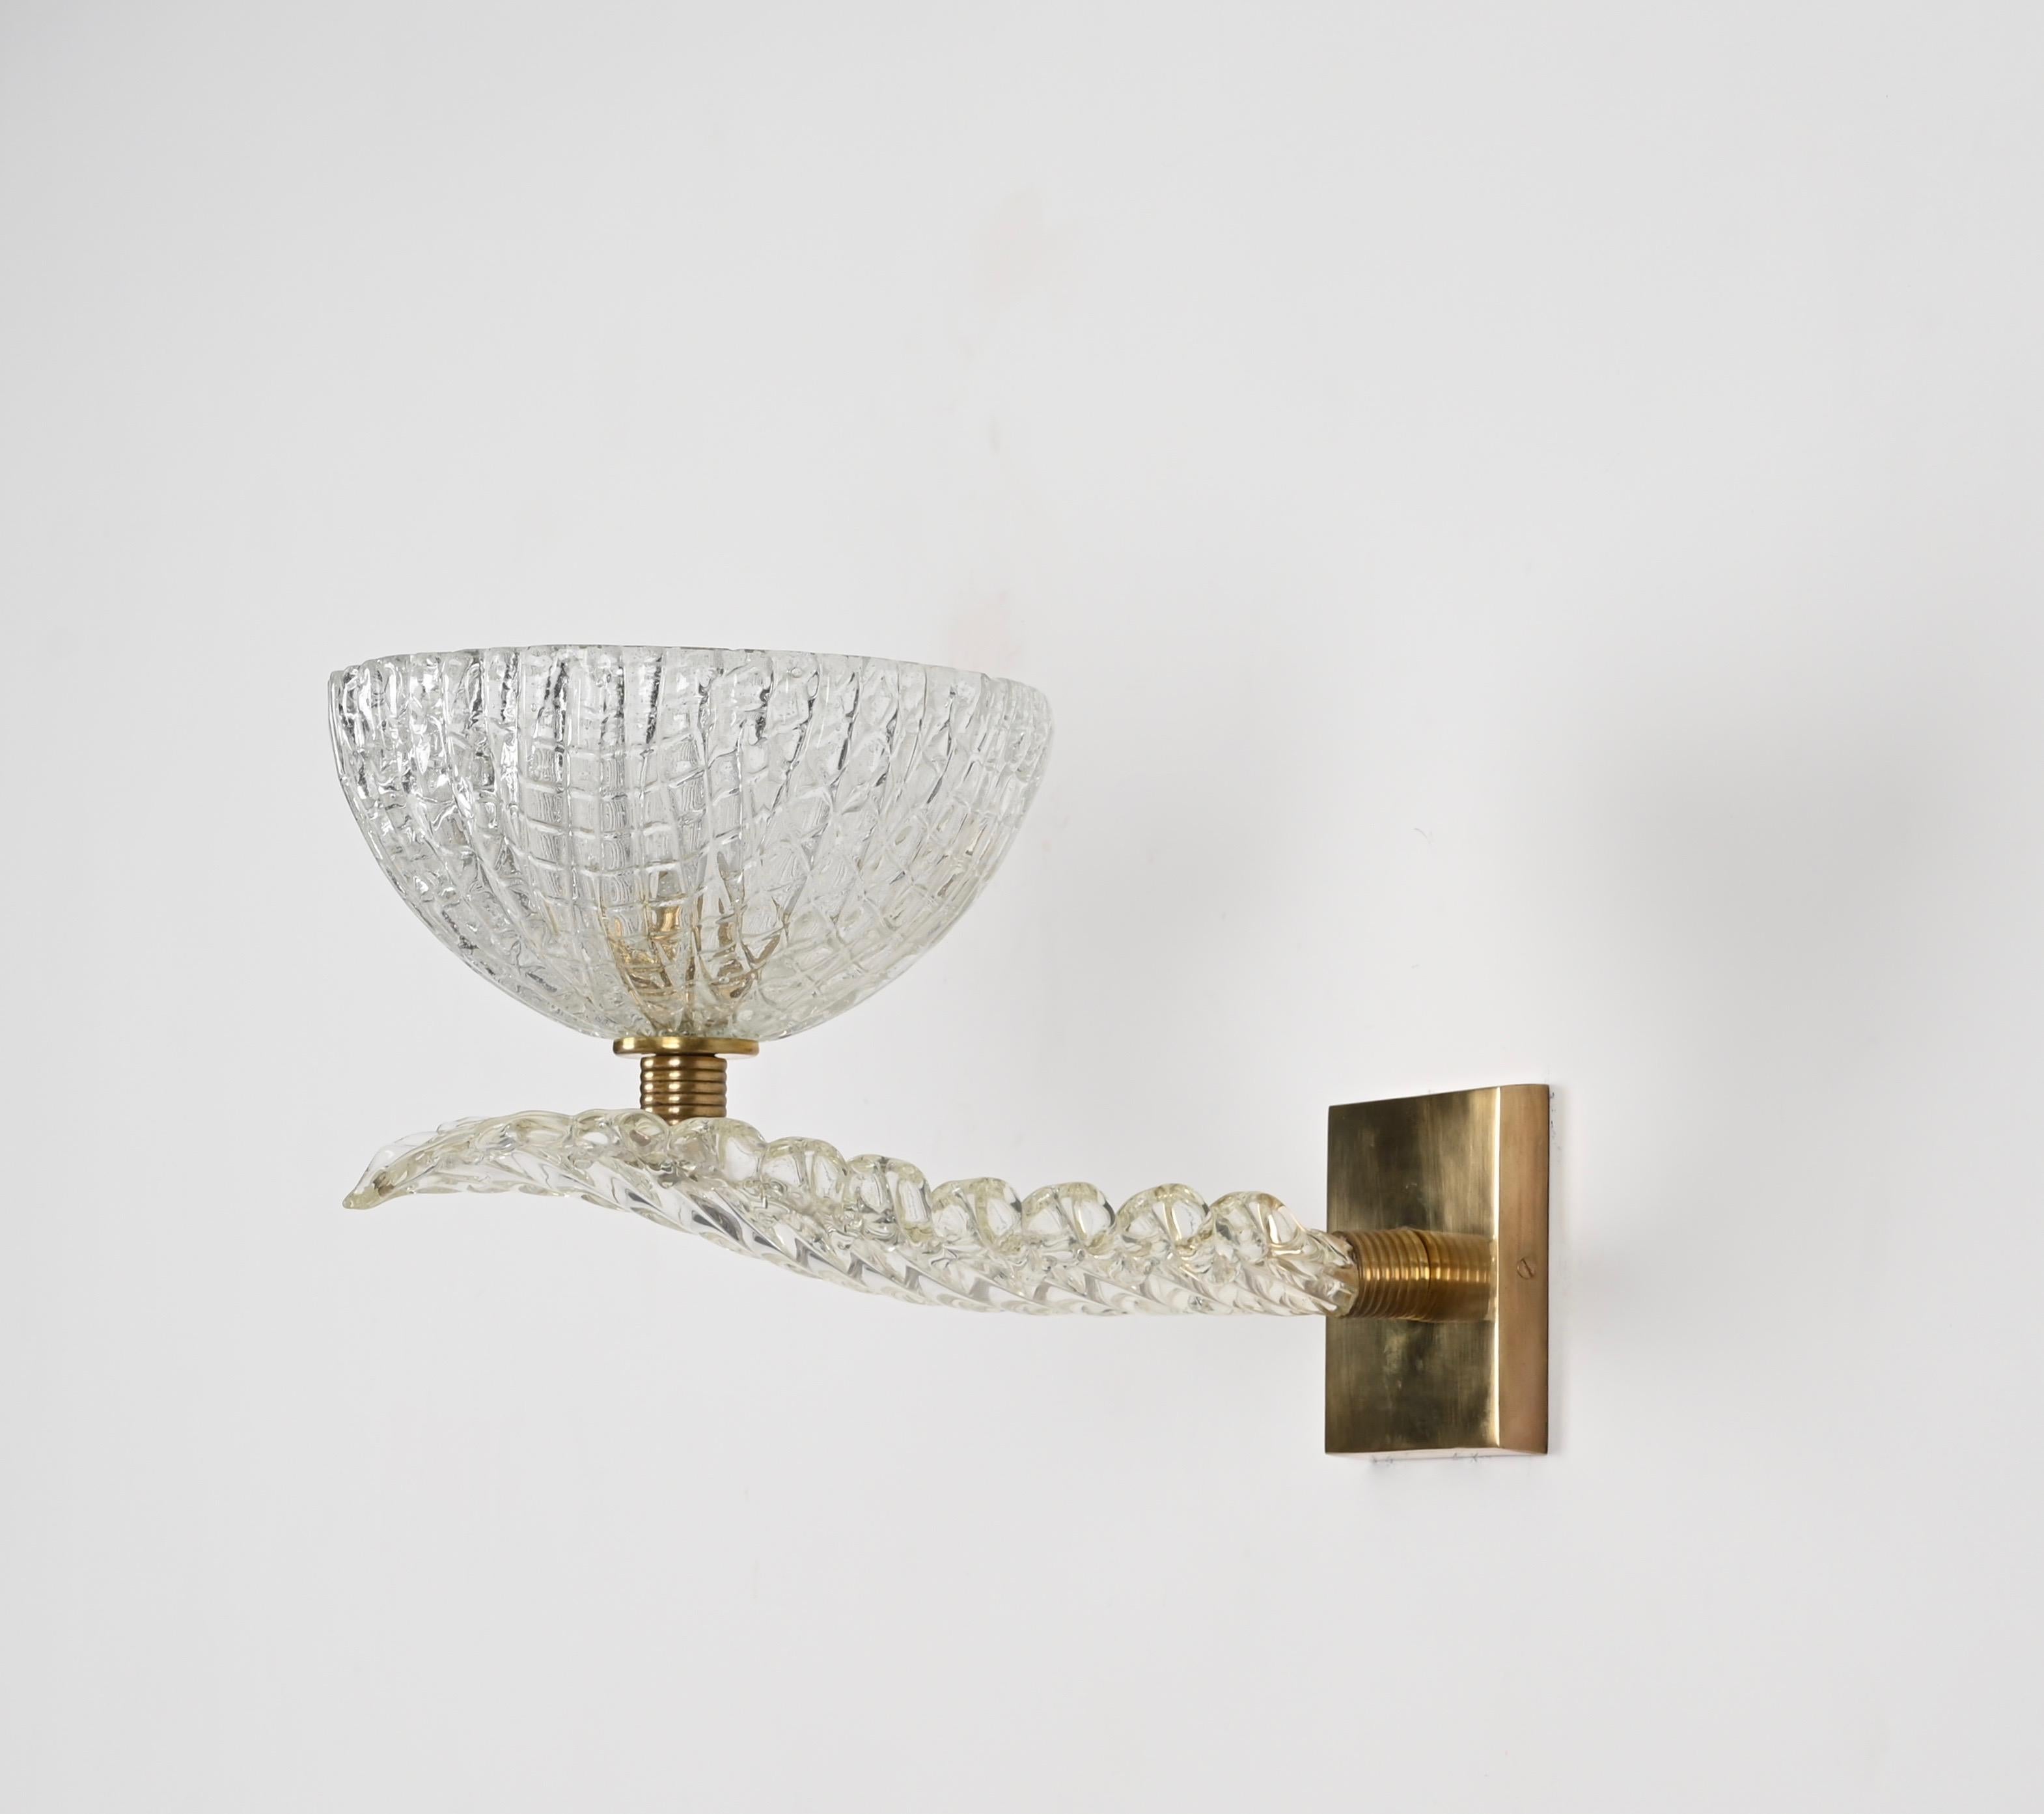 Incredible pair of enormous sconces fully hand-made in Murano mouth blown crystal glass and solid brass. These mind-blowing wall lamps were designed by Barovier & Toso and made in Murano, Italy during the 1950s.

These incredibly rare sconces